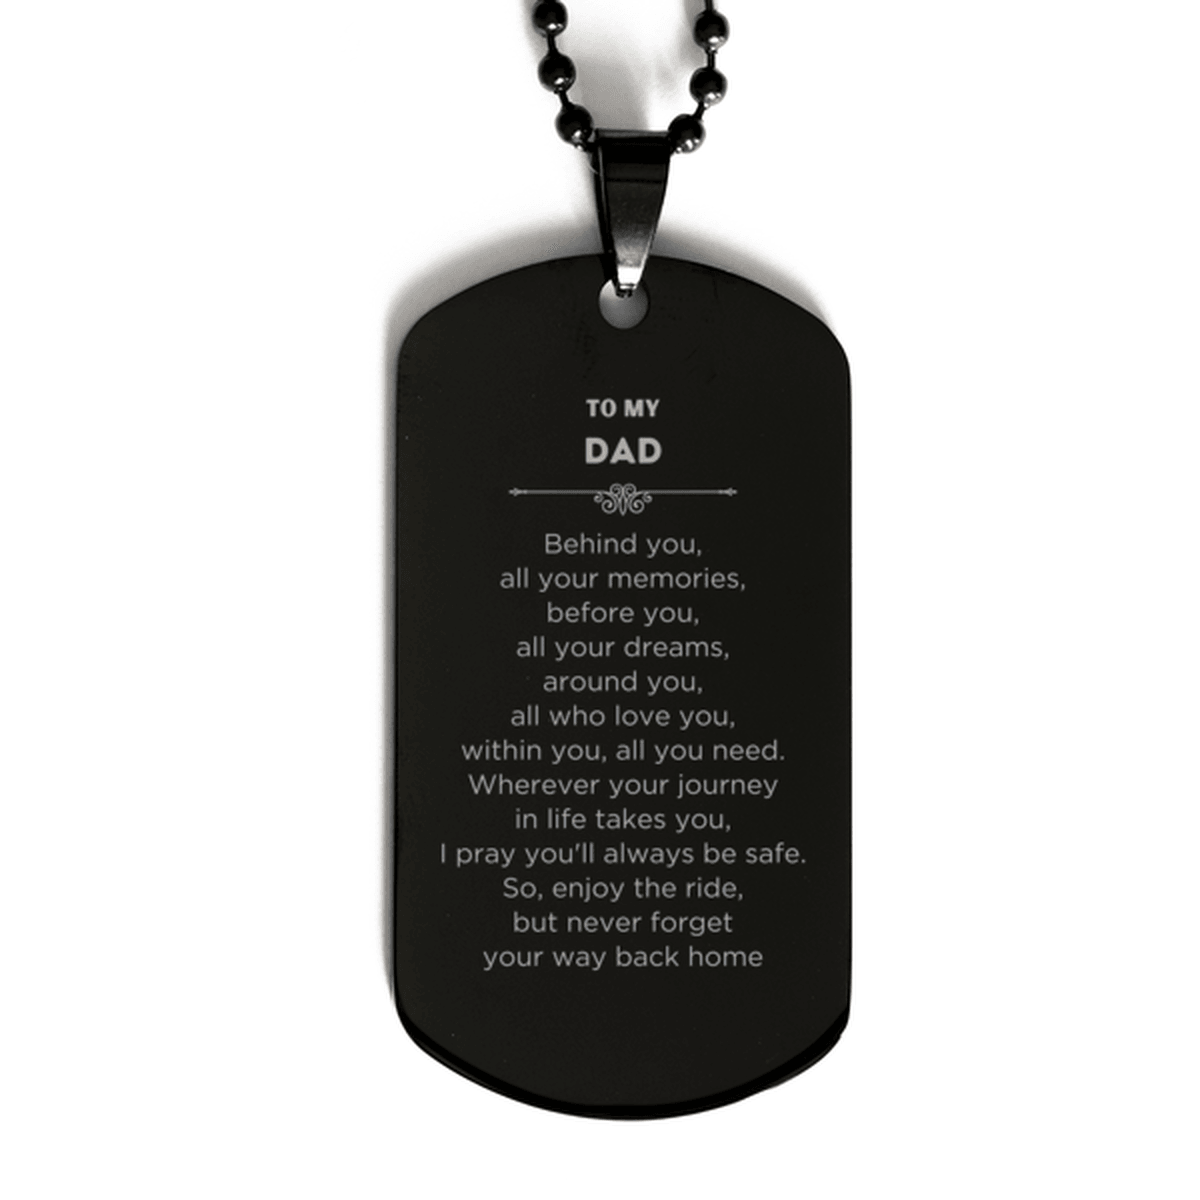 Dad Black Dog Tag Necklace Birthday Christmas Unique Gifts Behind you, all your memories, before you, all your dreams - Mallard Moon Gift Shop